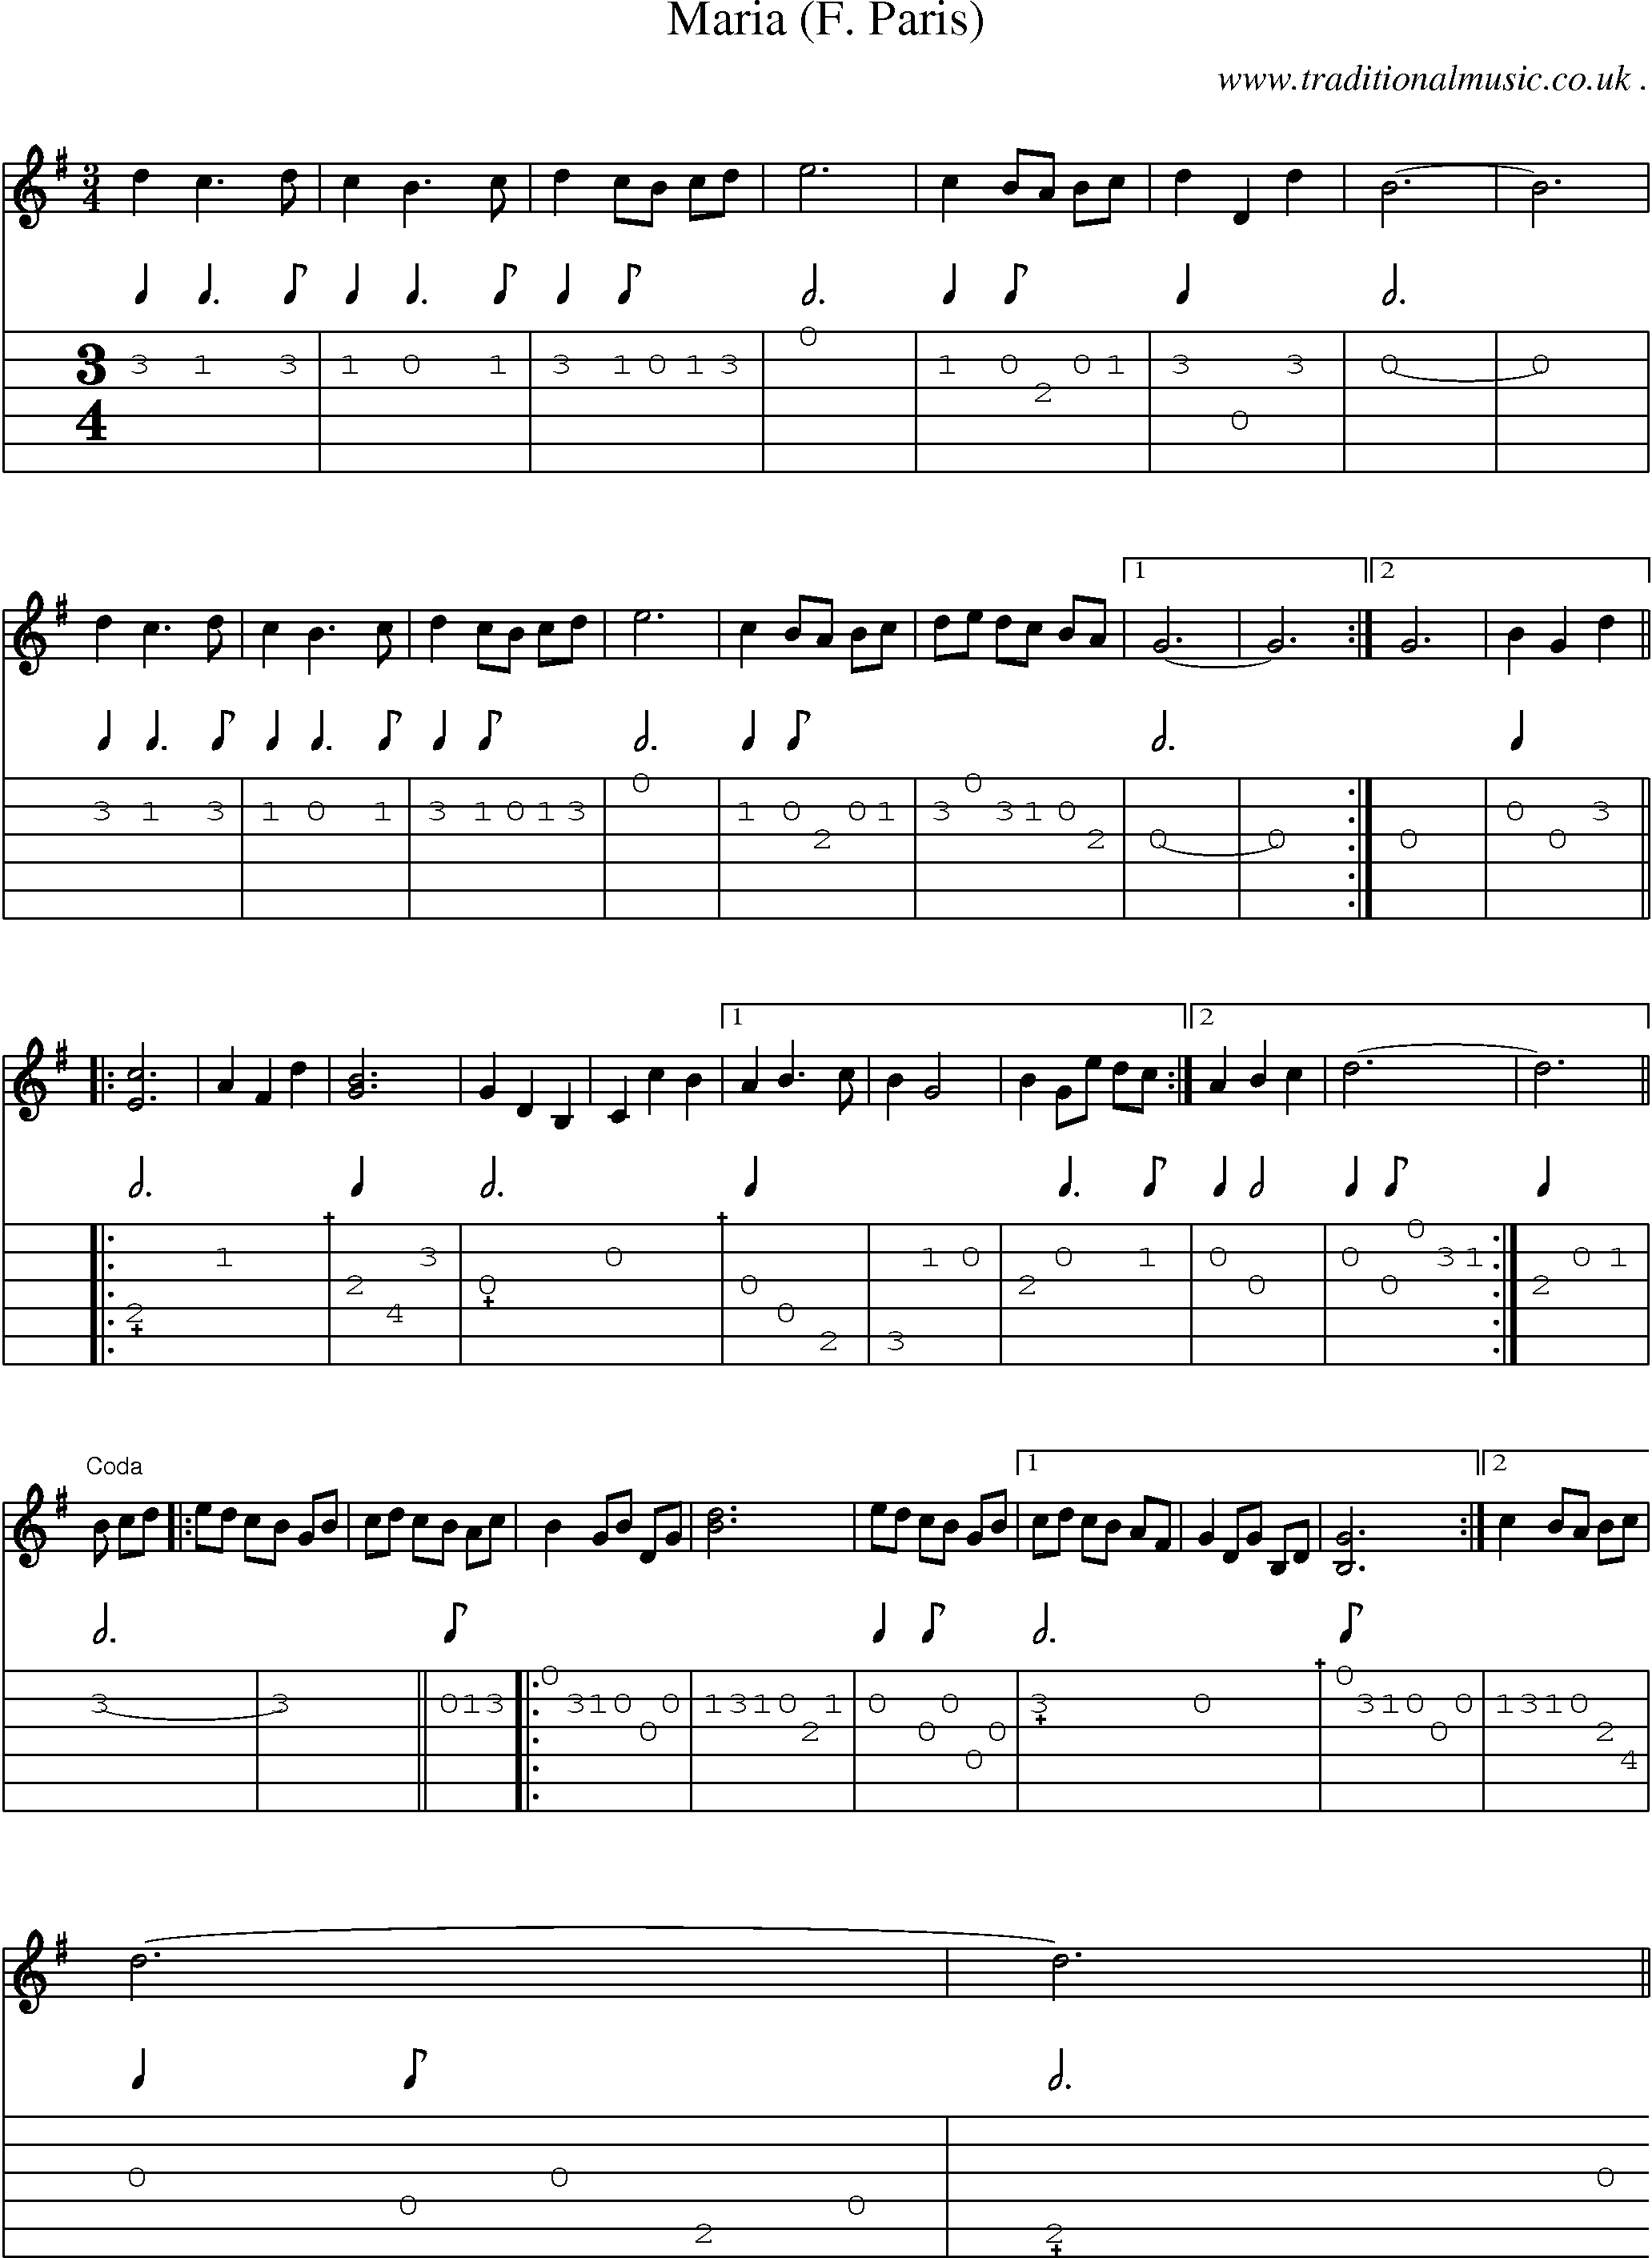 Sheet-Music and Guitar Tabs for Maria (f Paris)